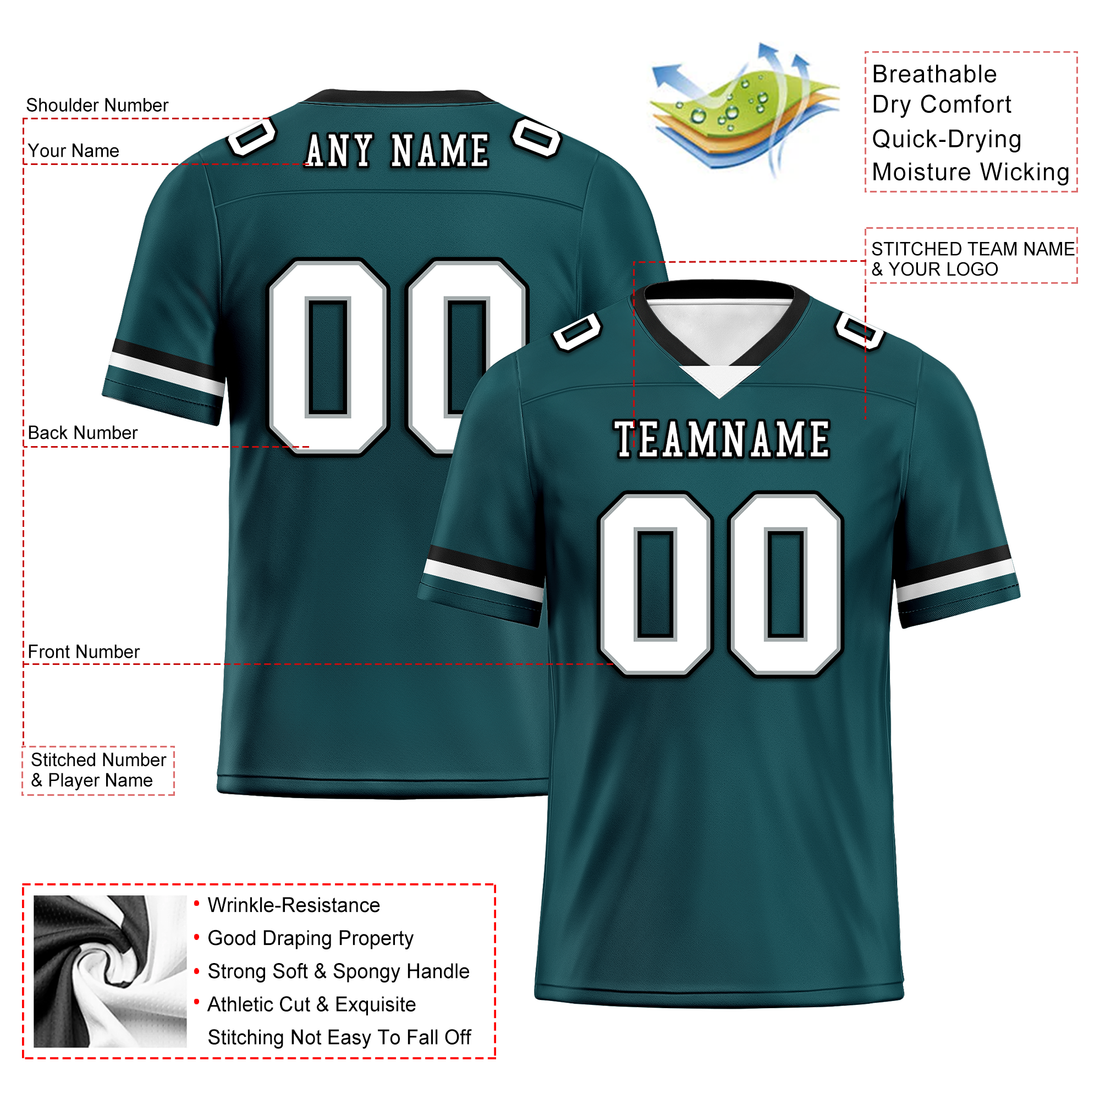 Custom Cyan Classic Style Personalized Authentic Football Jersey FBJ02-bd0a70ab